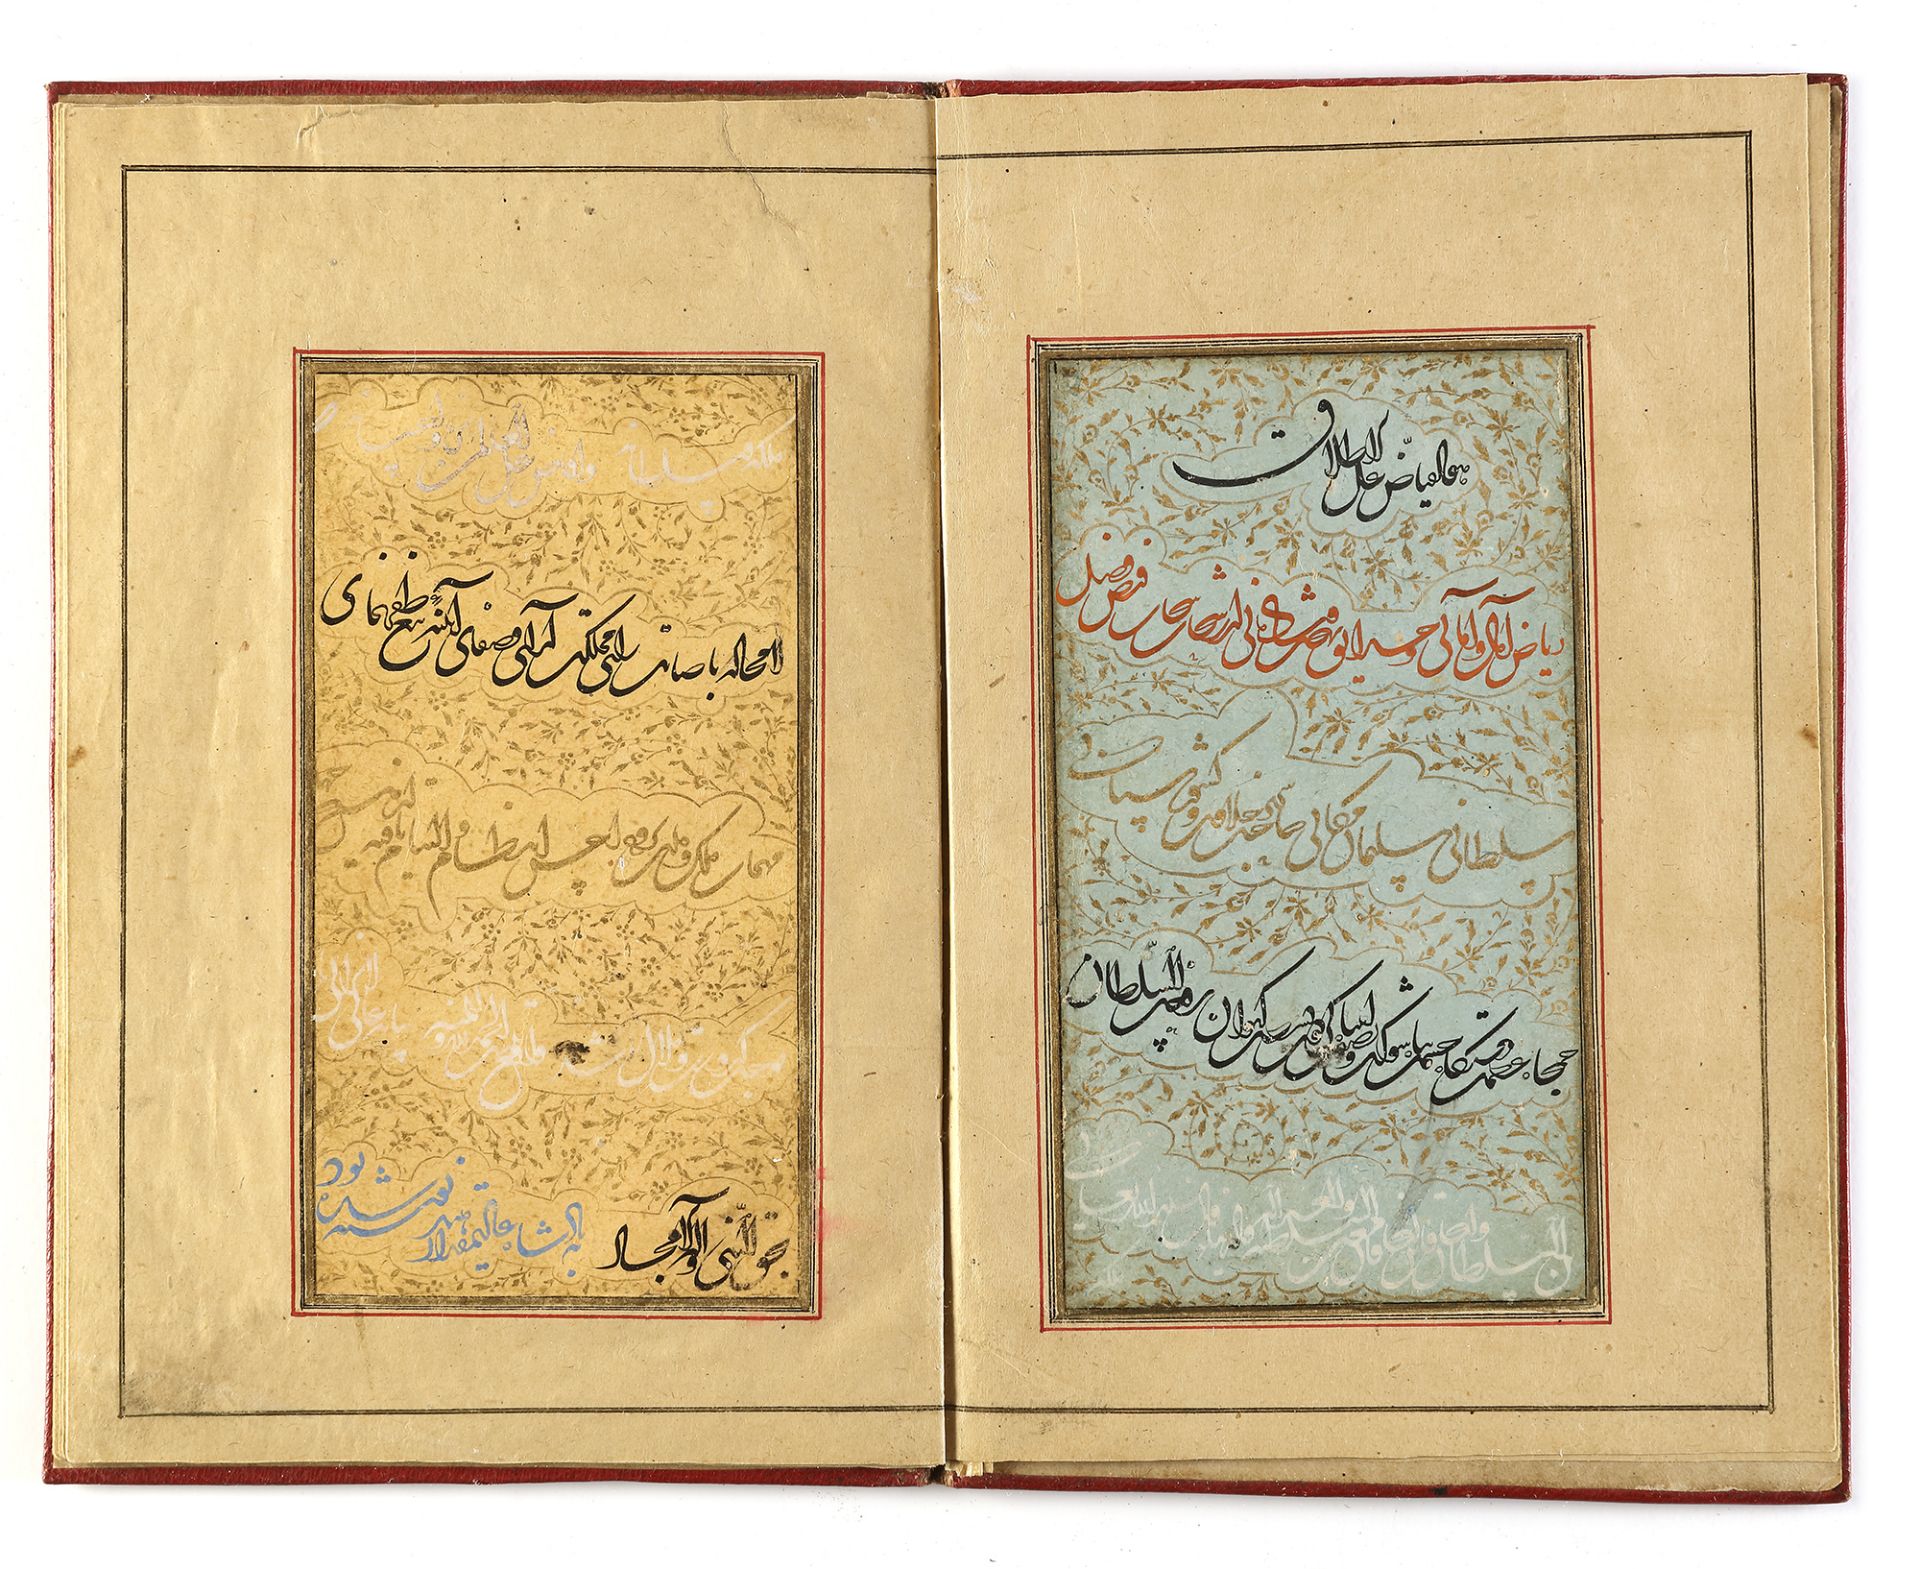 A MANUSCRIPT OF POETRY, SIGNED BY IKHTIYAR AL-MUNSHI, PERSIA, SAVAFID, DATED 975 AH/1567-68 AD - Image 3 of 18